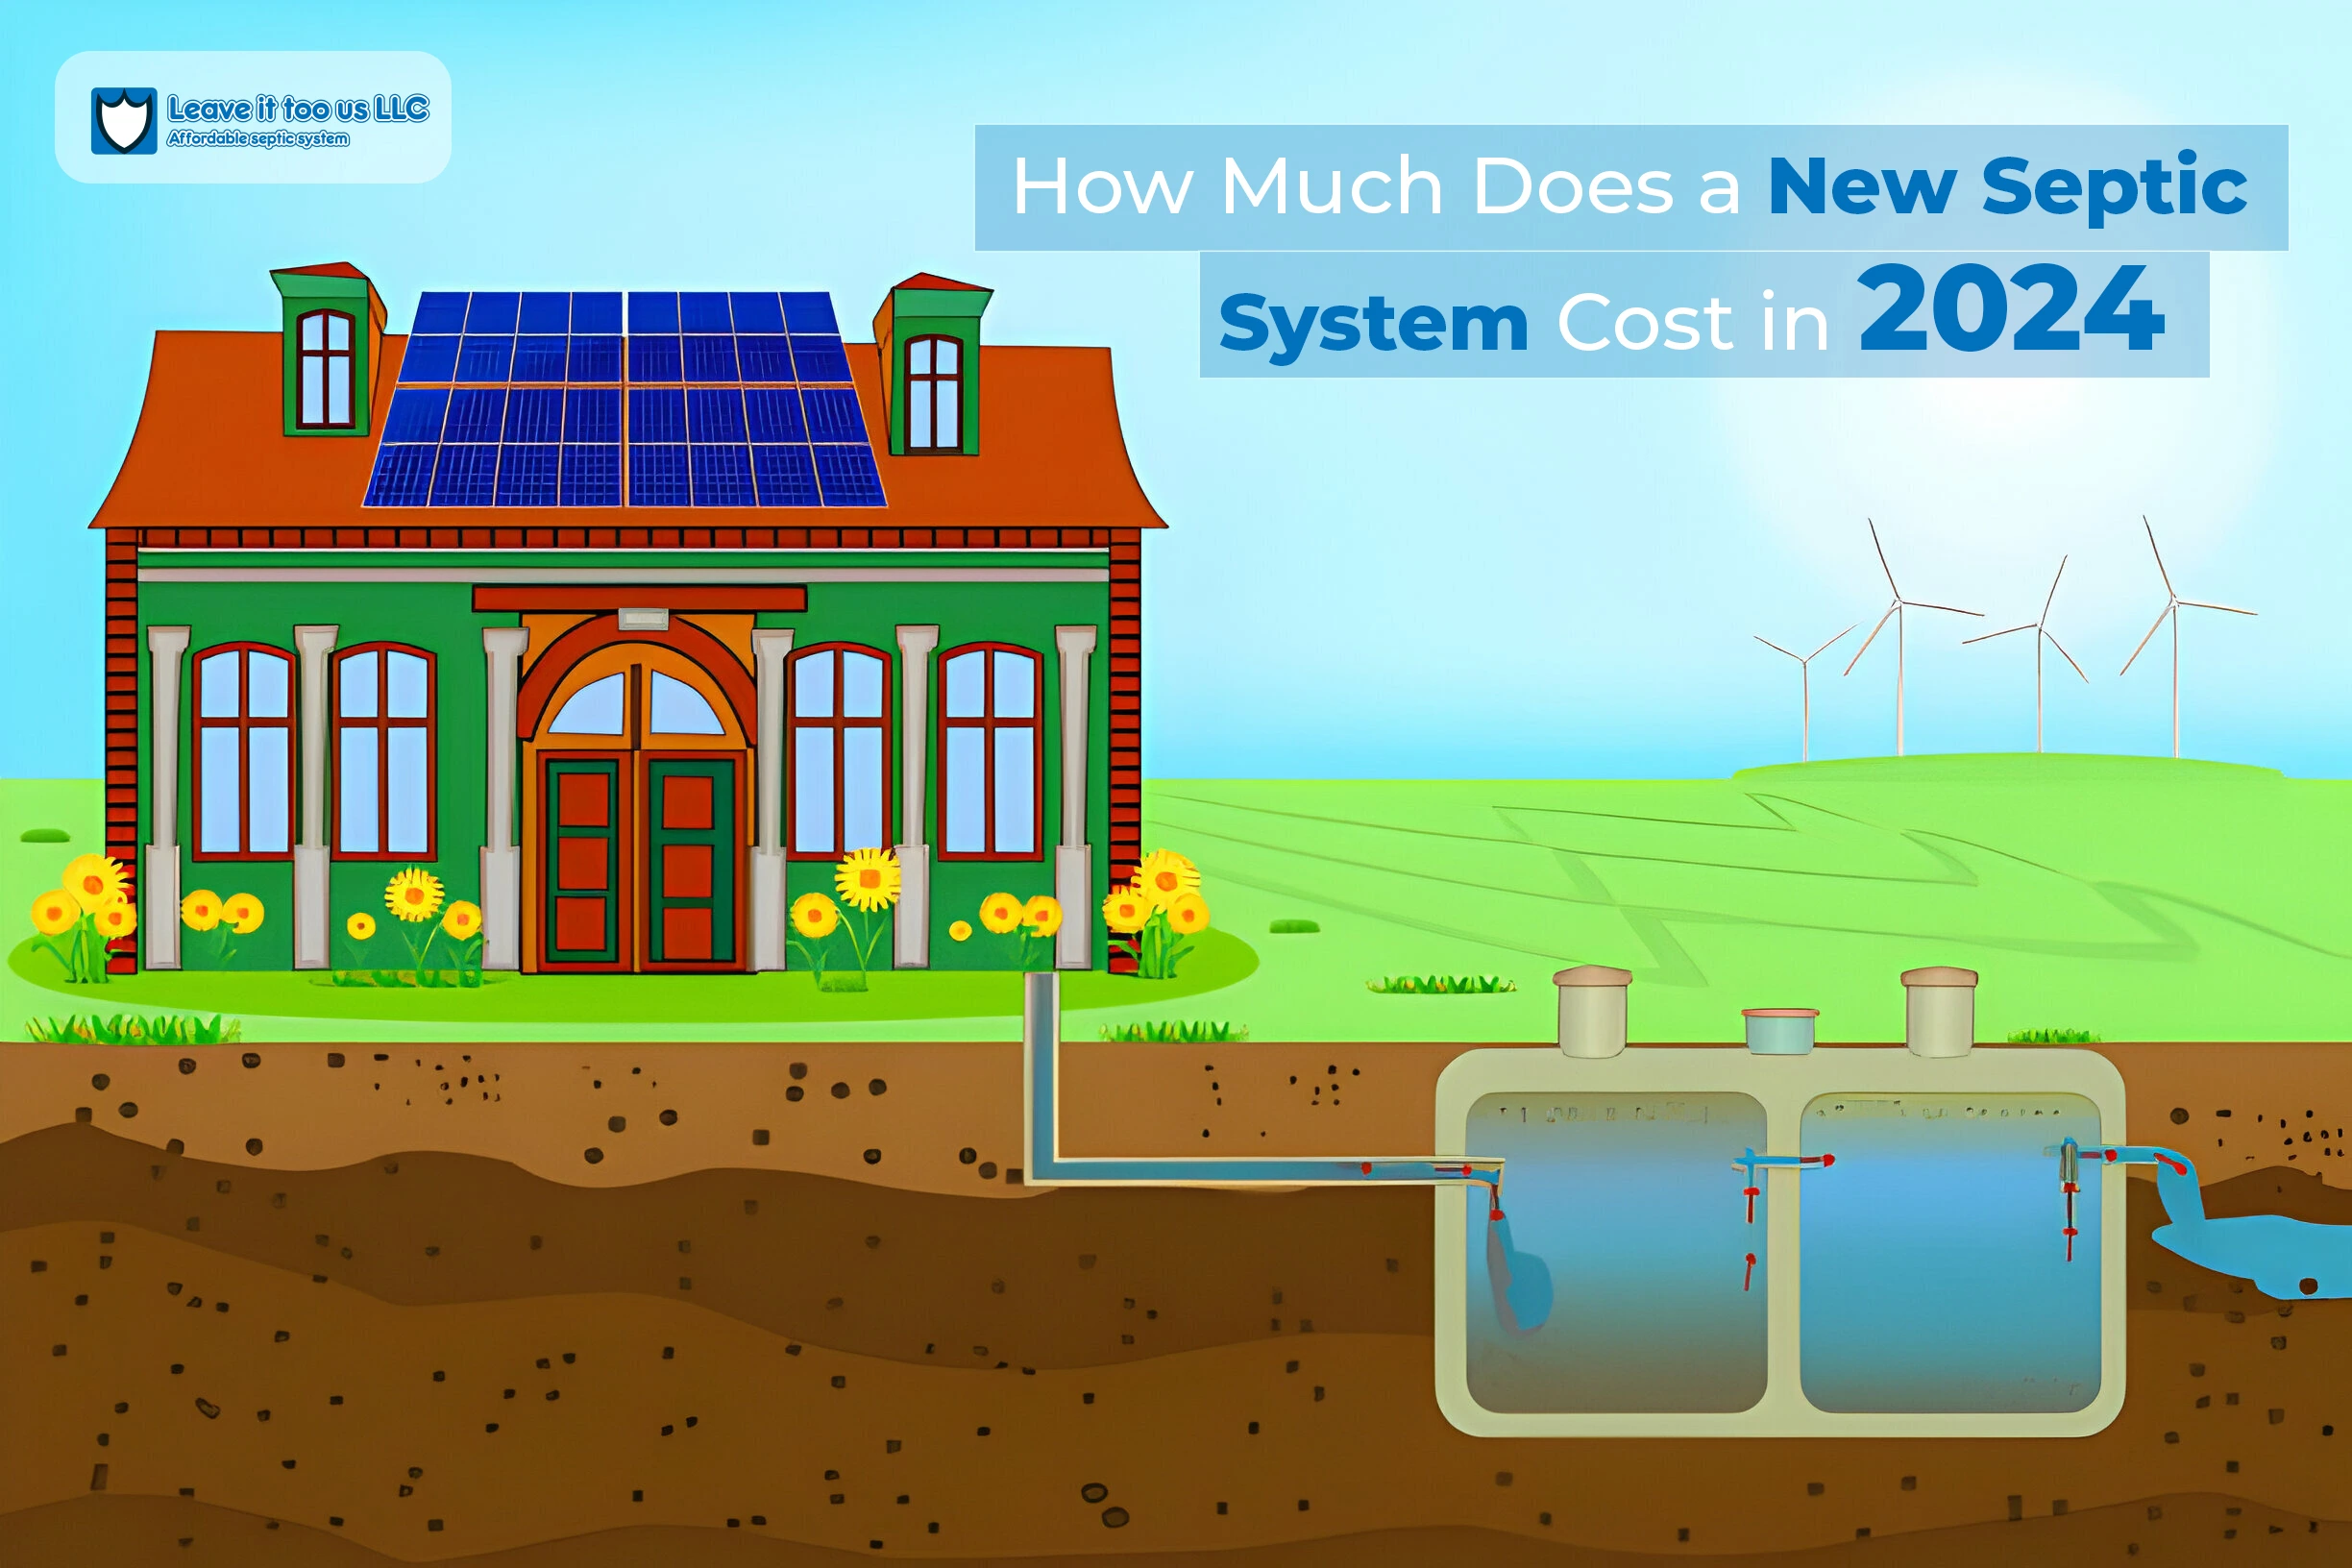 New Septic System Cost in 2024